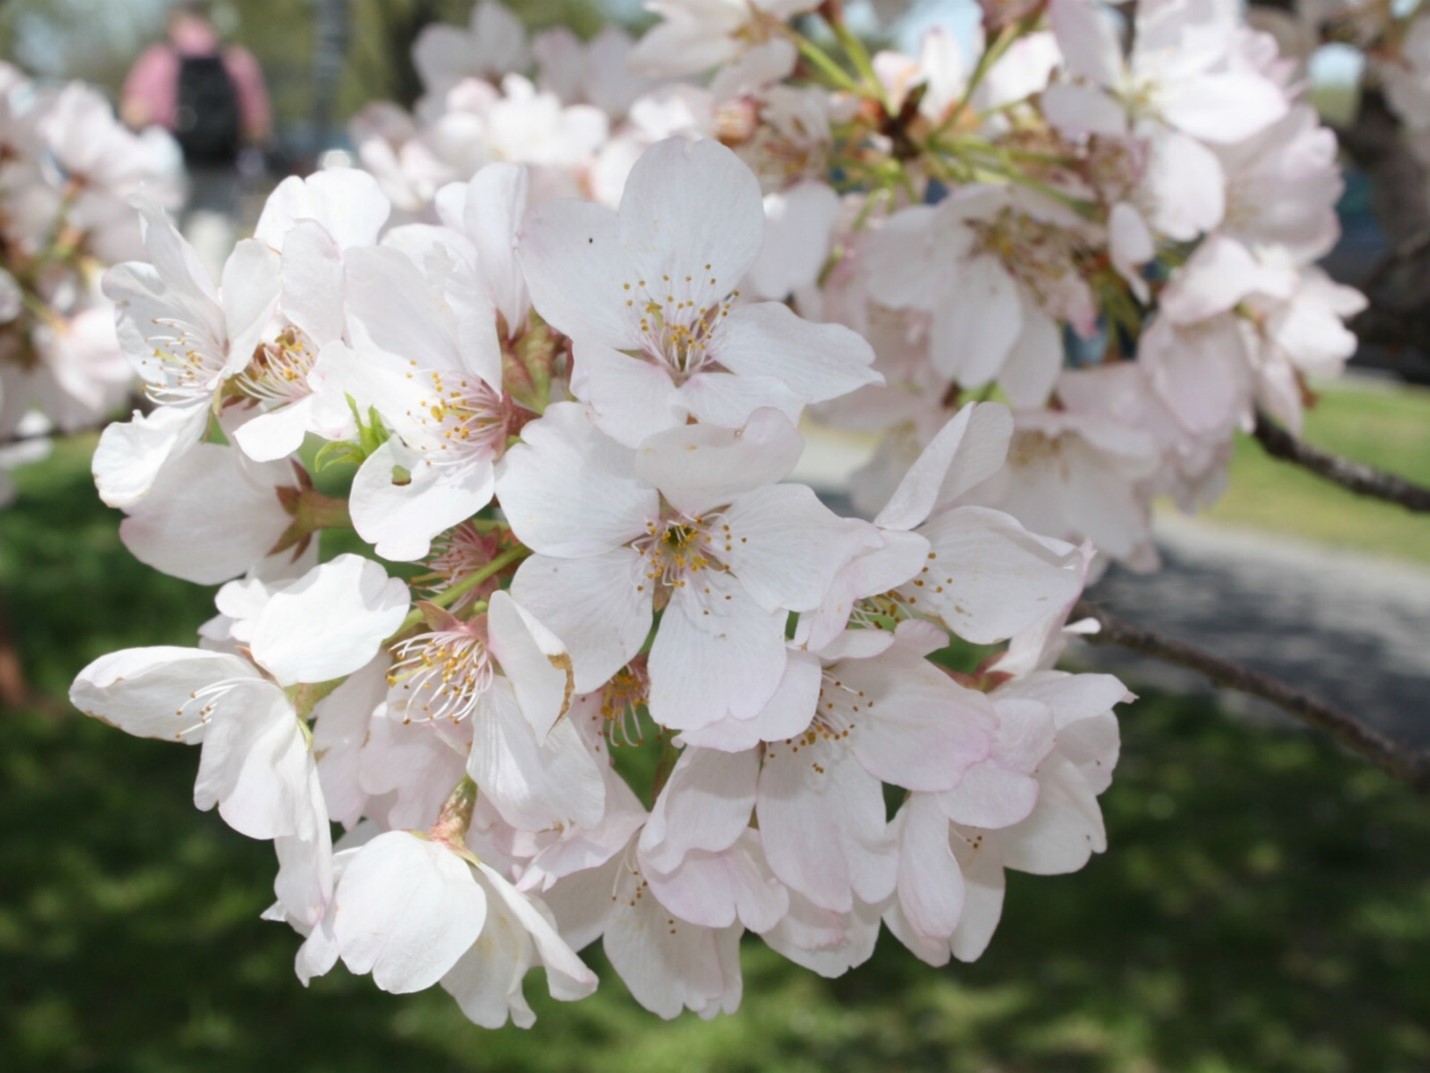 Closeup of white cherry blossoms showing the detail of the individual flowers.